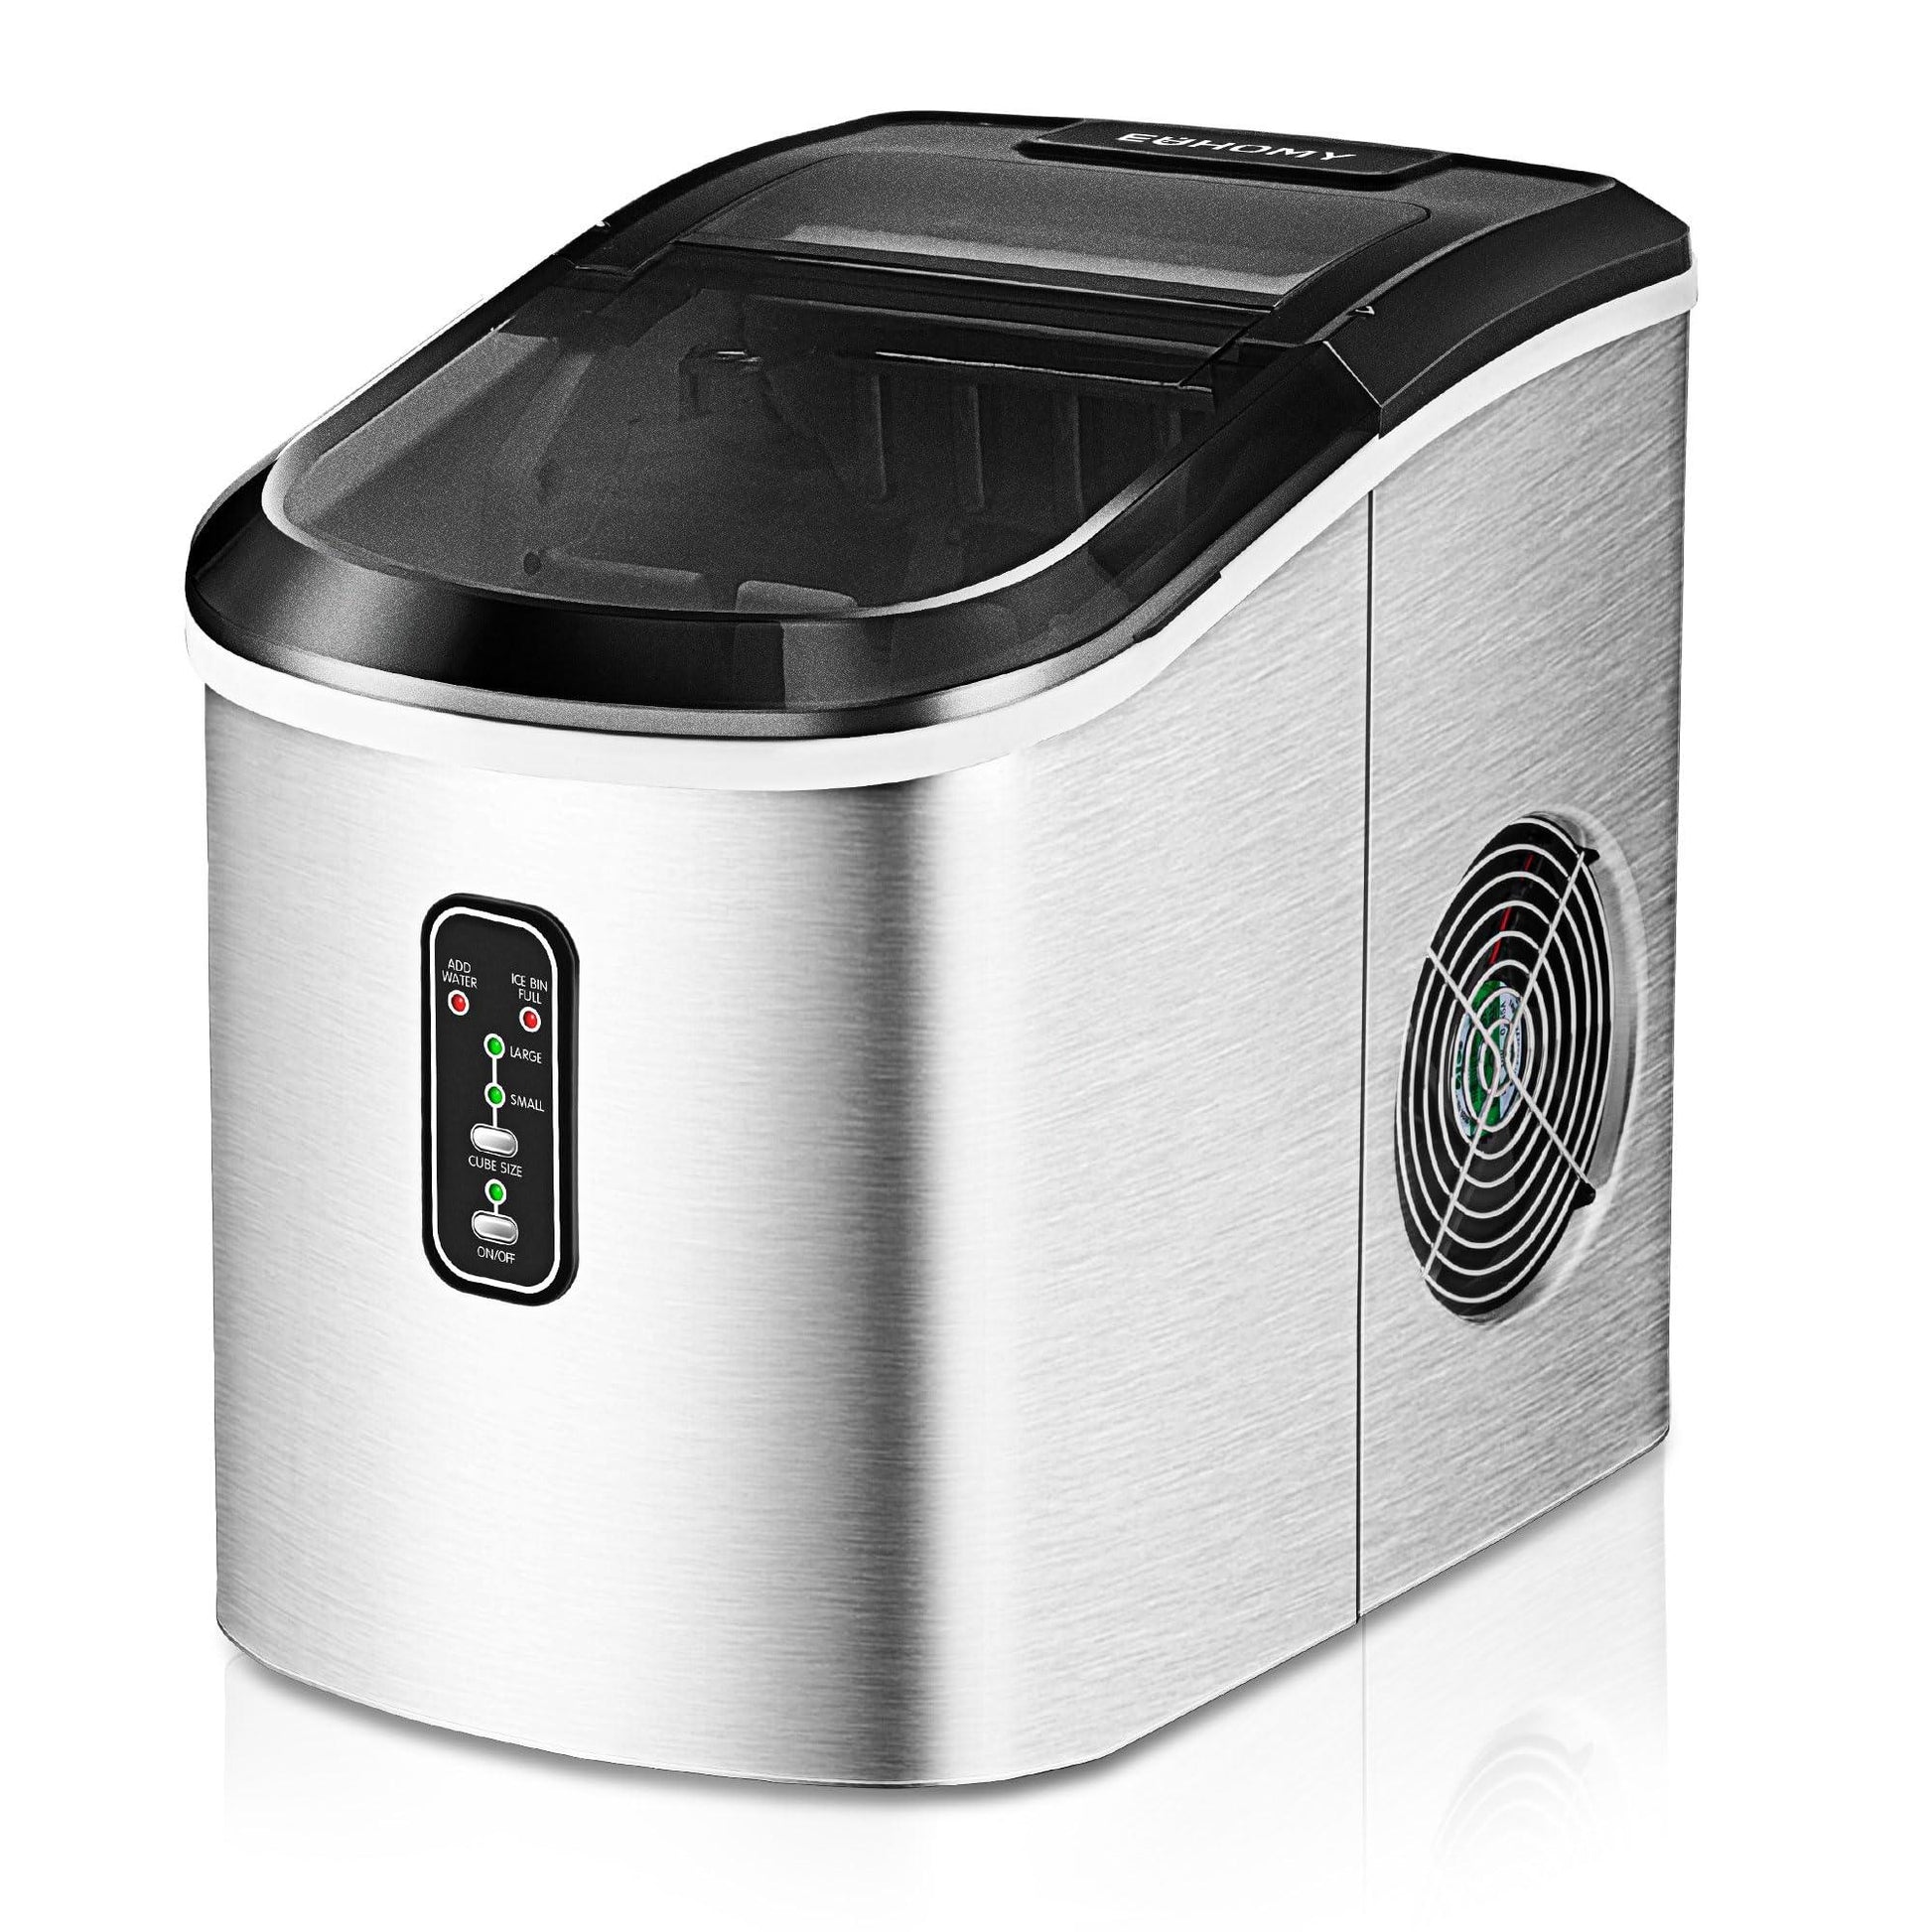 EUHOMY Ice Maker Countertop Machine - 26 lbs in 24 Hours, 9 Cubes Ready in 8 Mins, Electric ice maker and Compact potable ice maker with Ice Scoop and Basket. Perfect for Home/Kitchen/Office.(Sliver) - CookCave